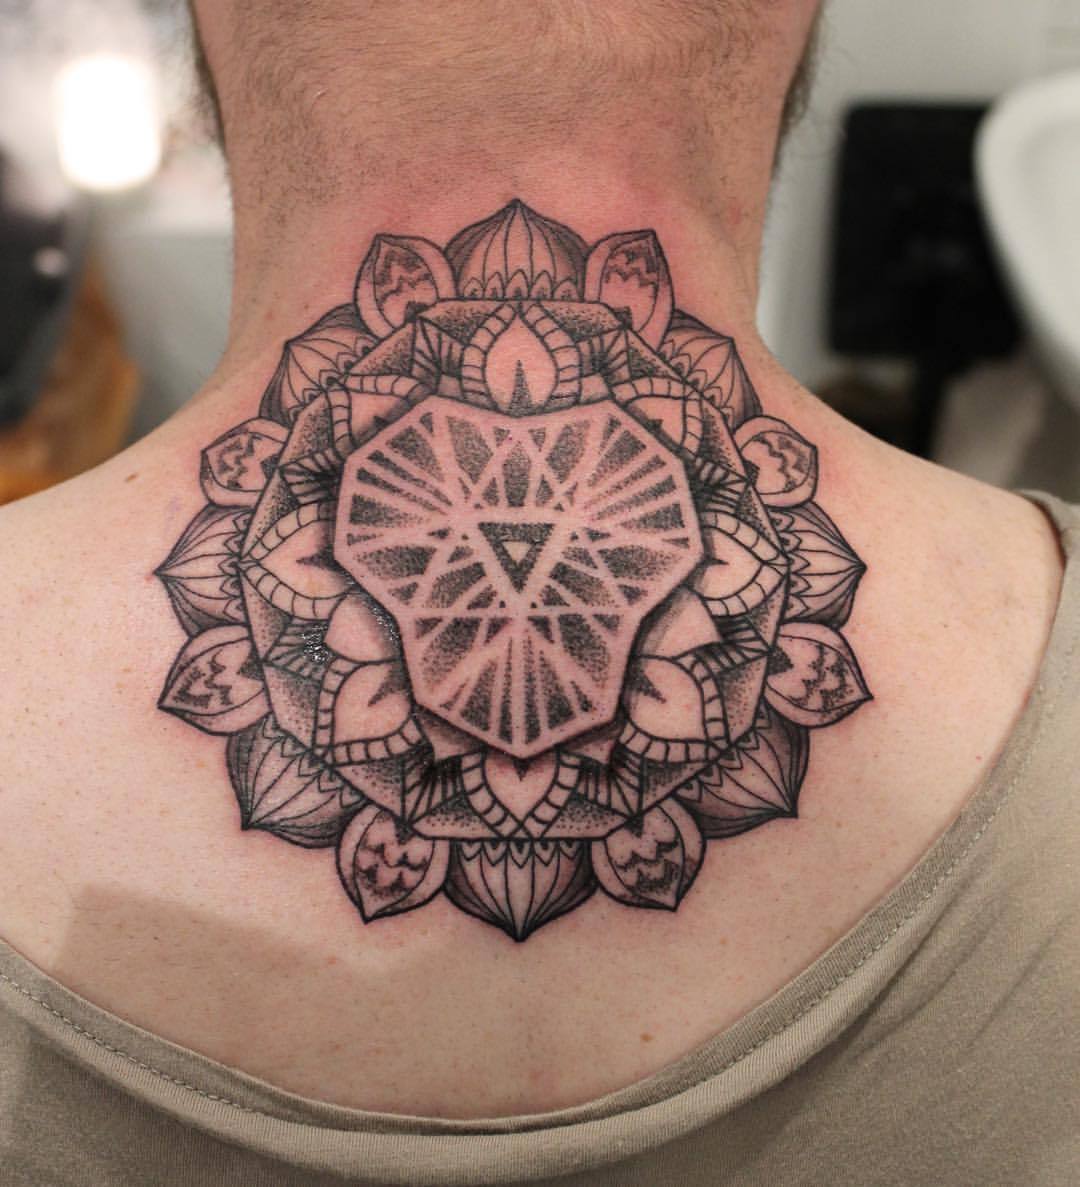 Bold and Badass: The Most Popular Tattoo Designs for Men in 2023